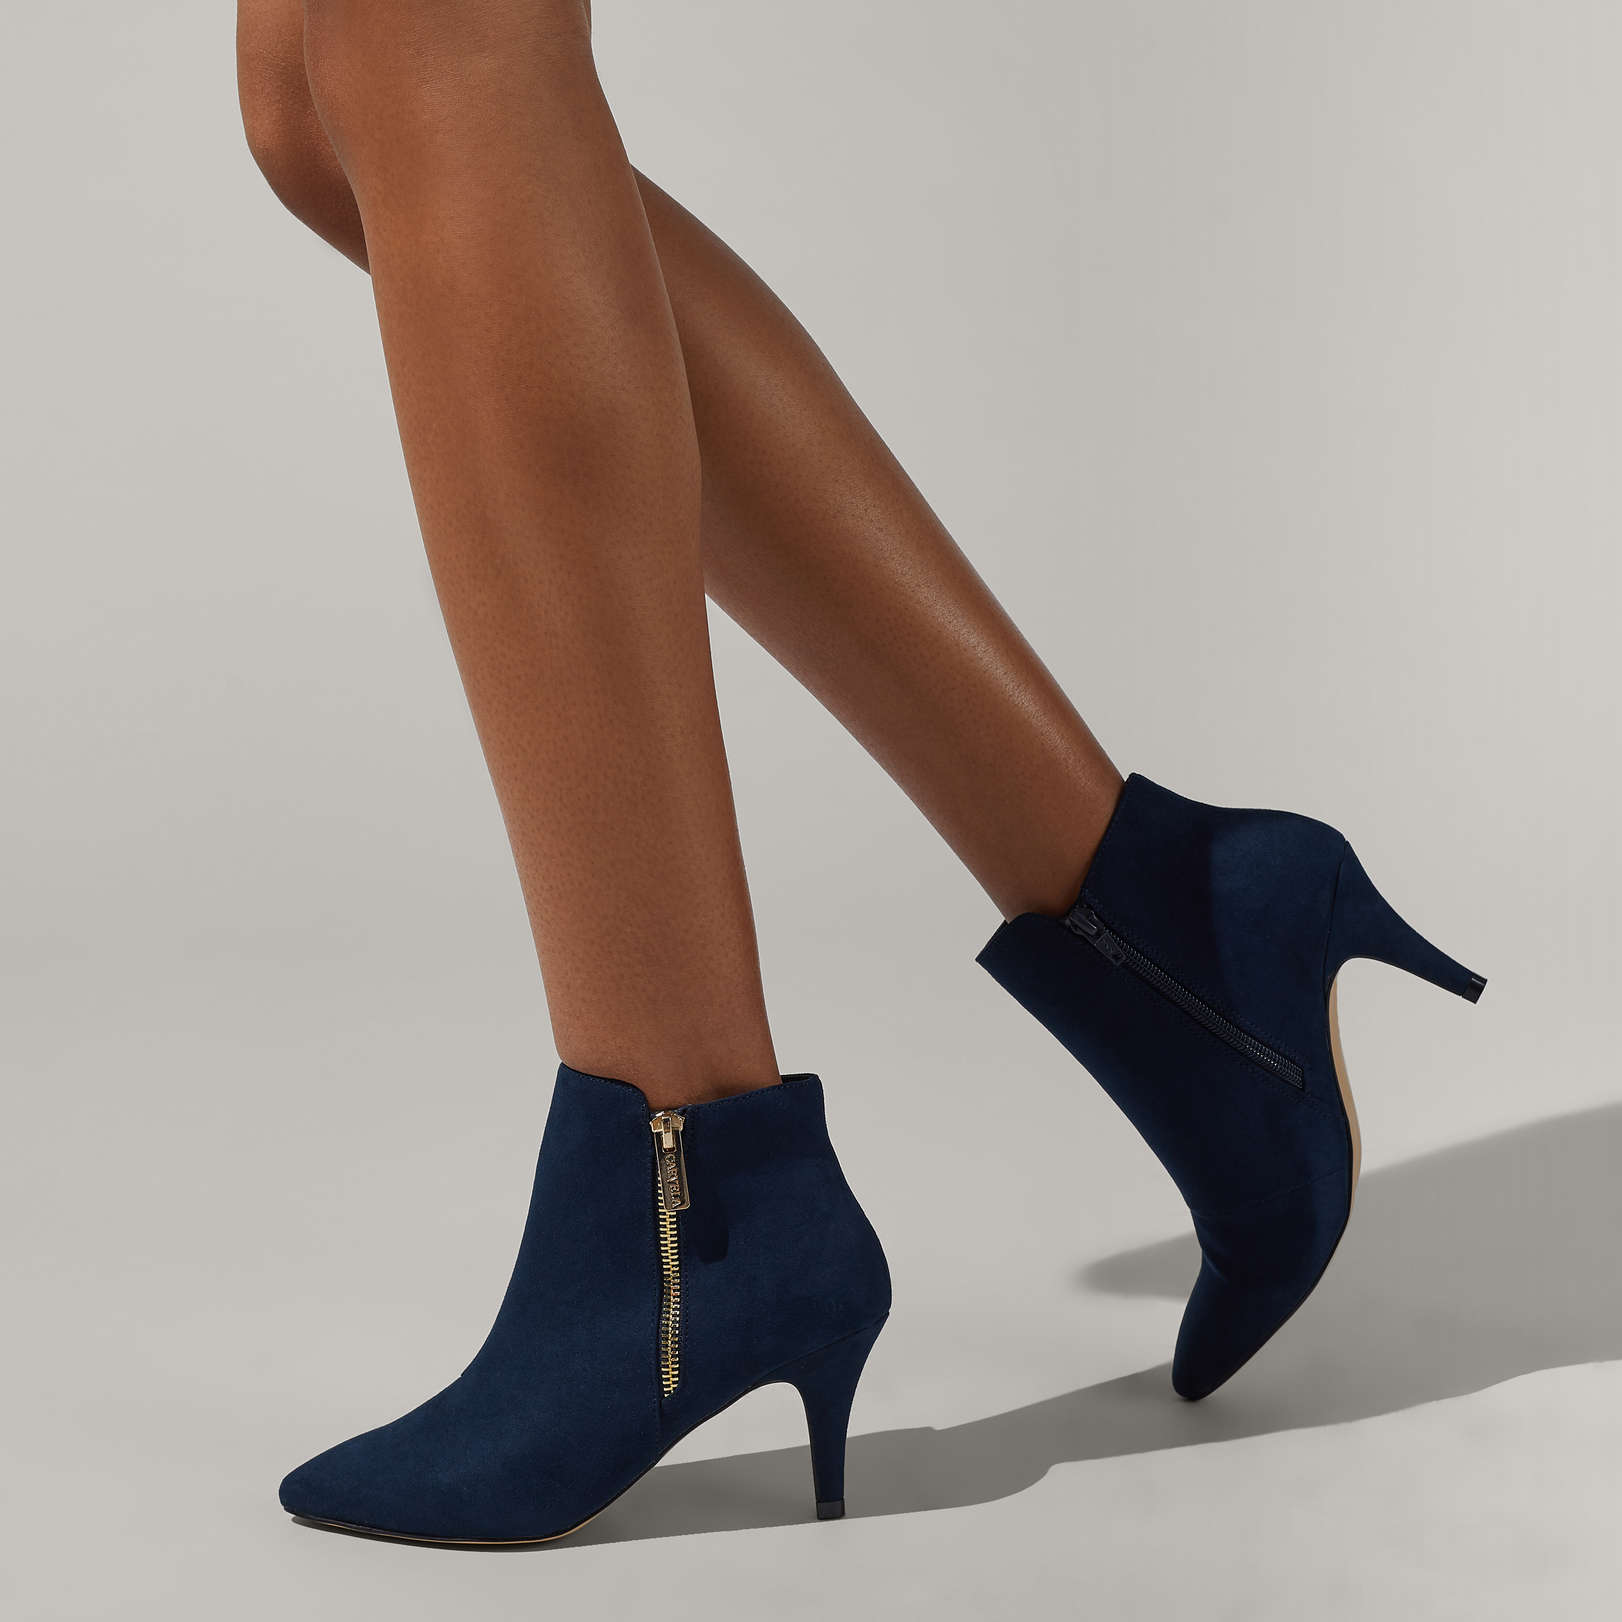 SPHINX - CARVELA Ankle Boots